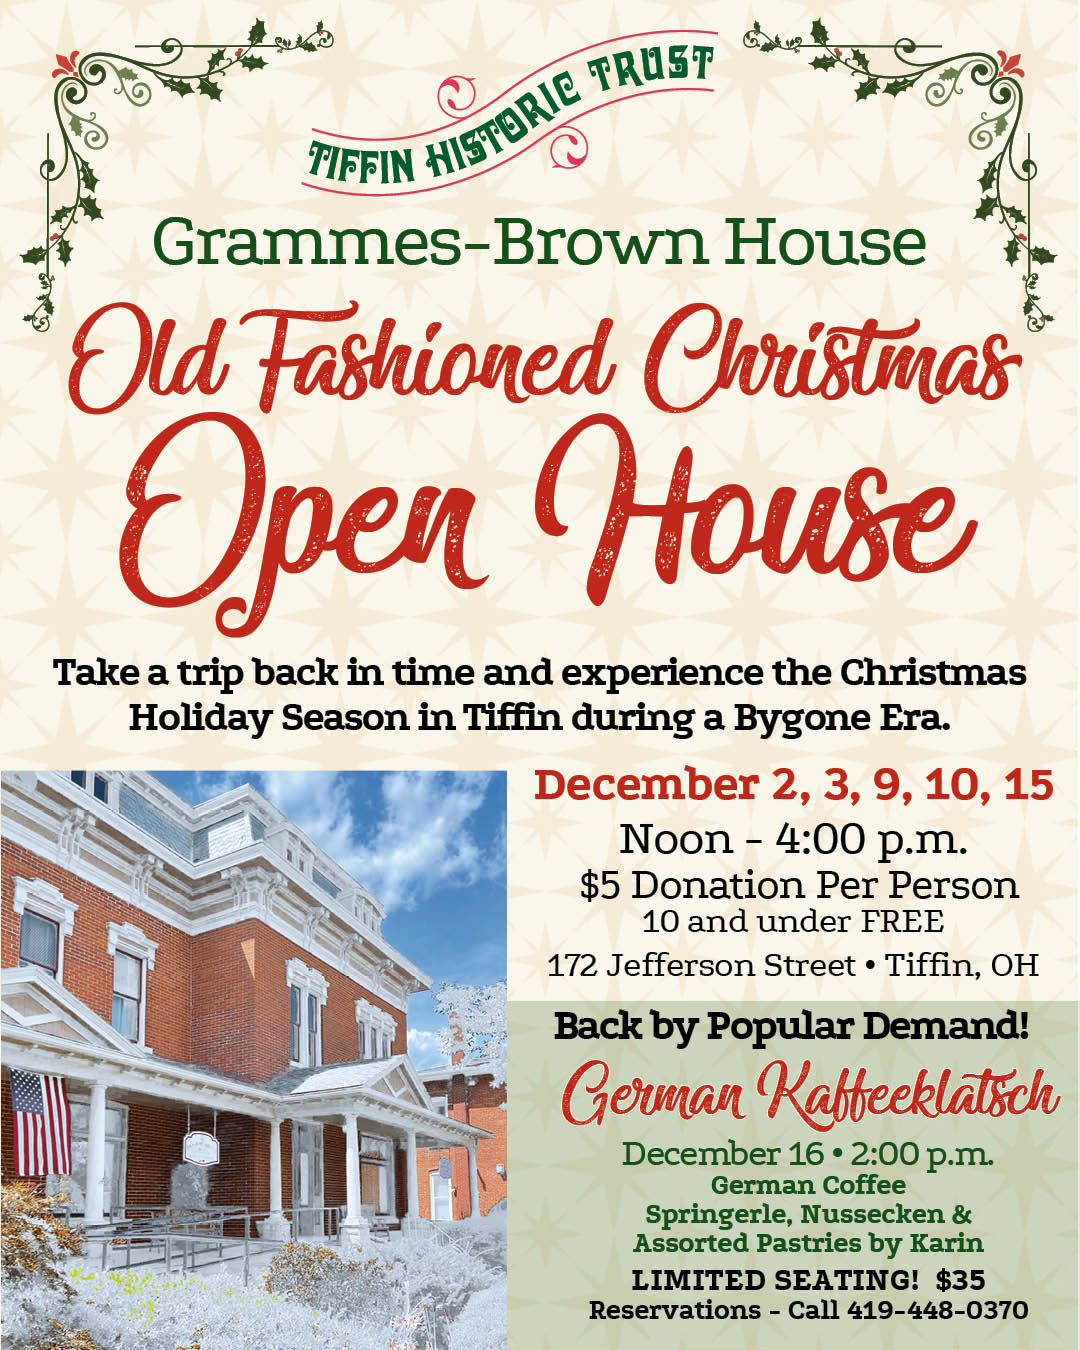 Old Fashioned Christmas Open House